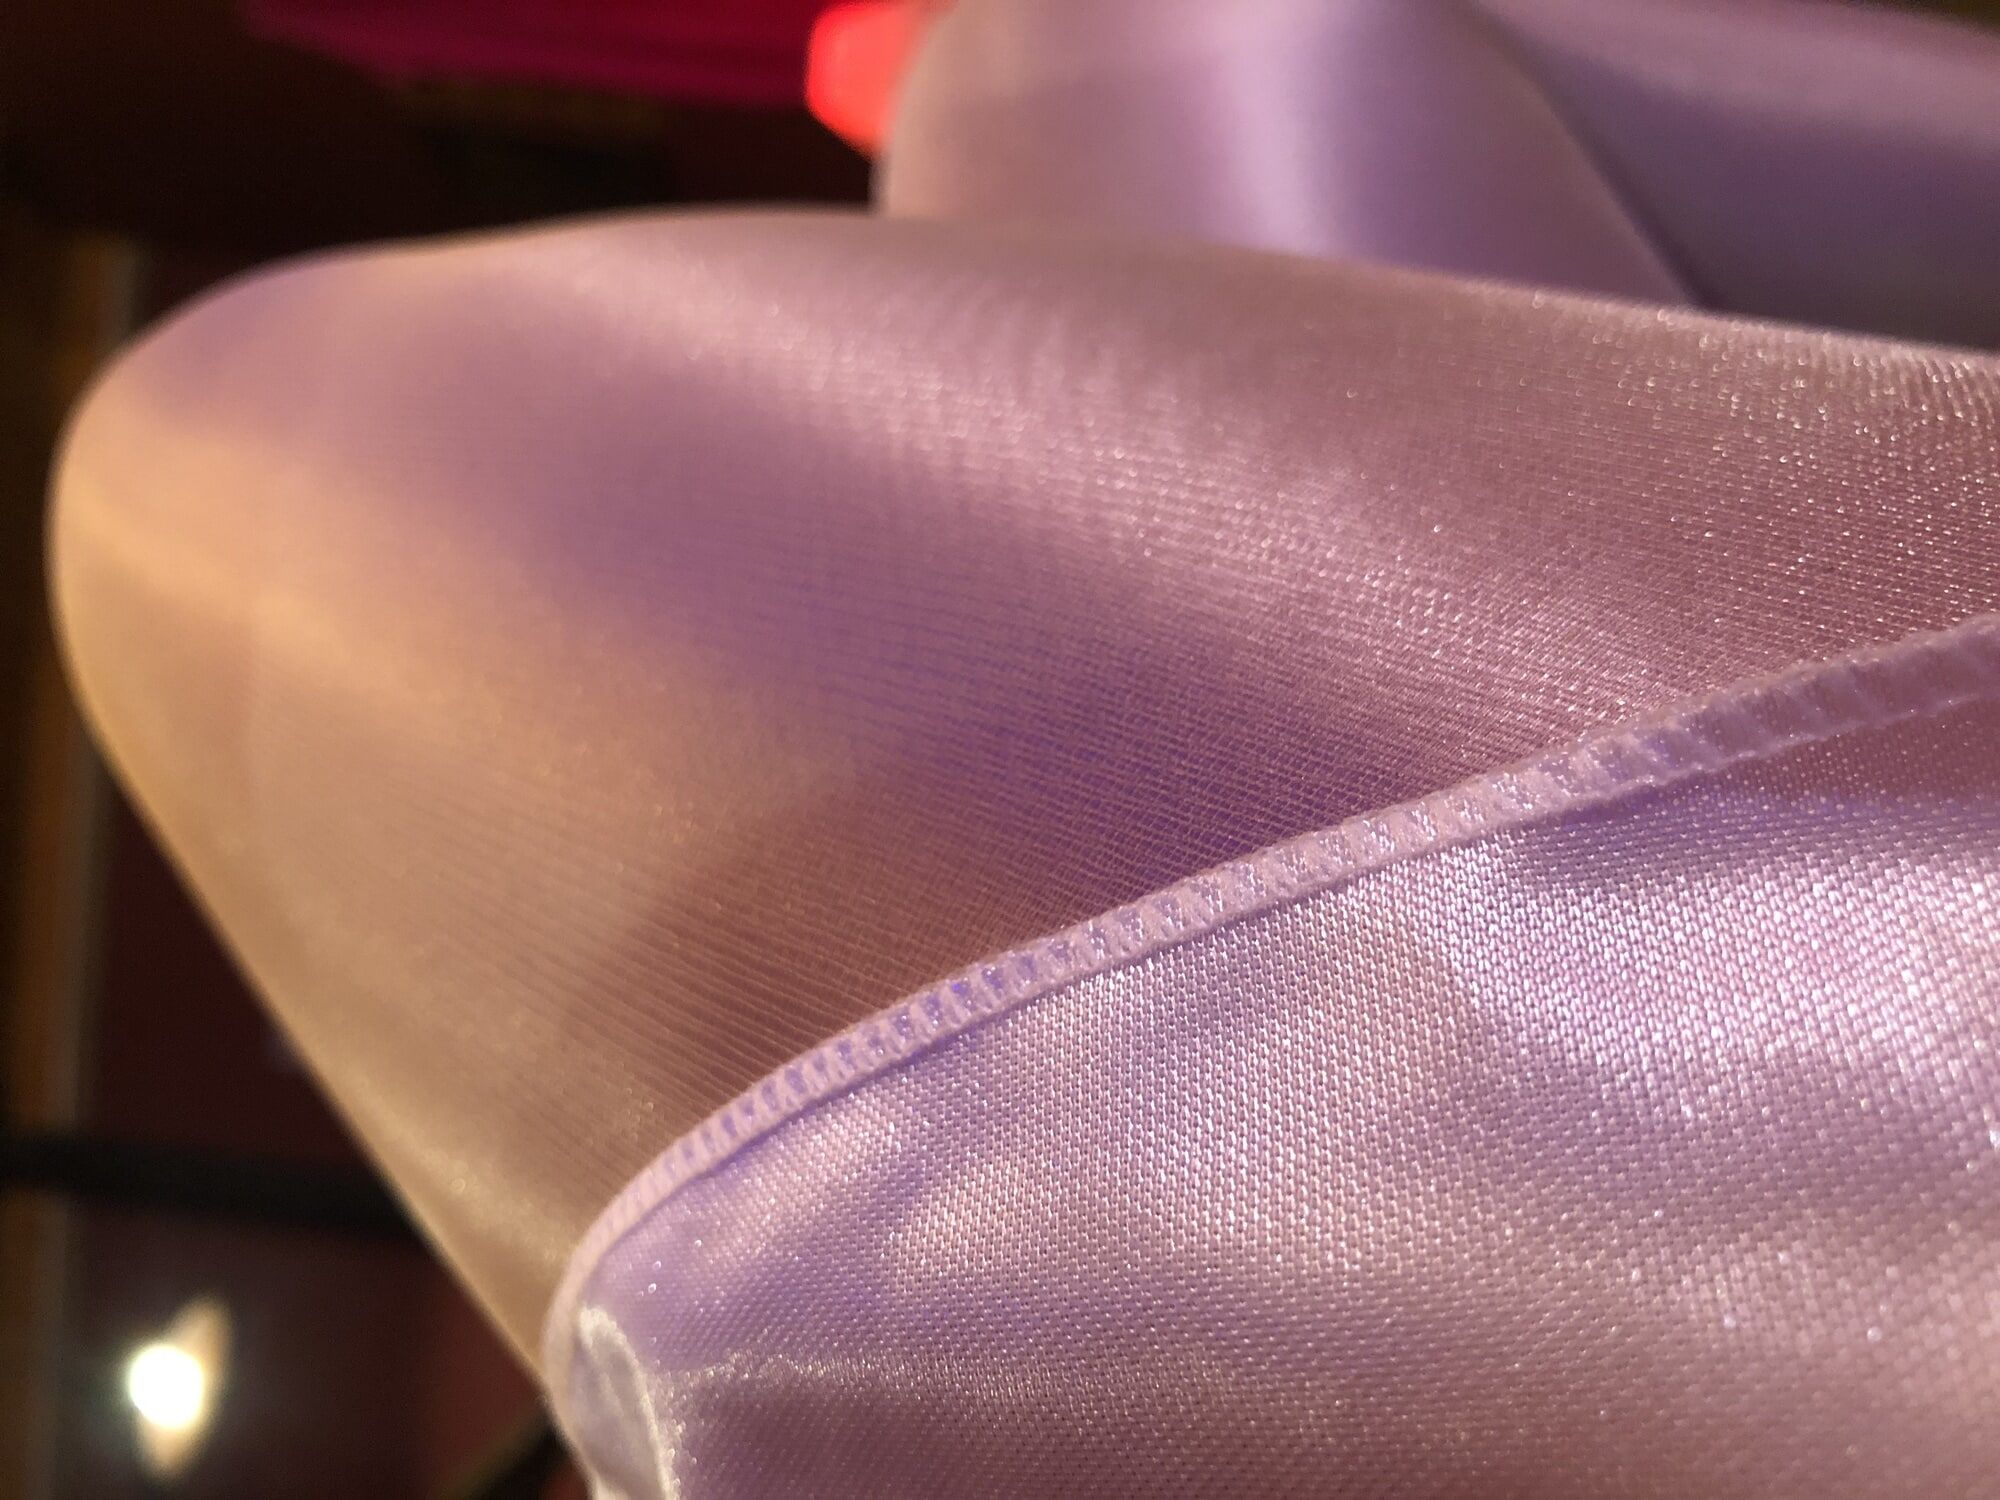 So much shiny, glossy and satin Pink and White combination. #15